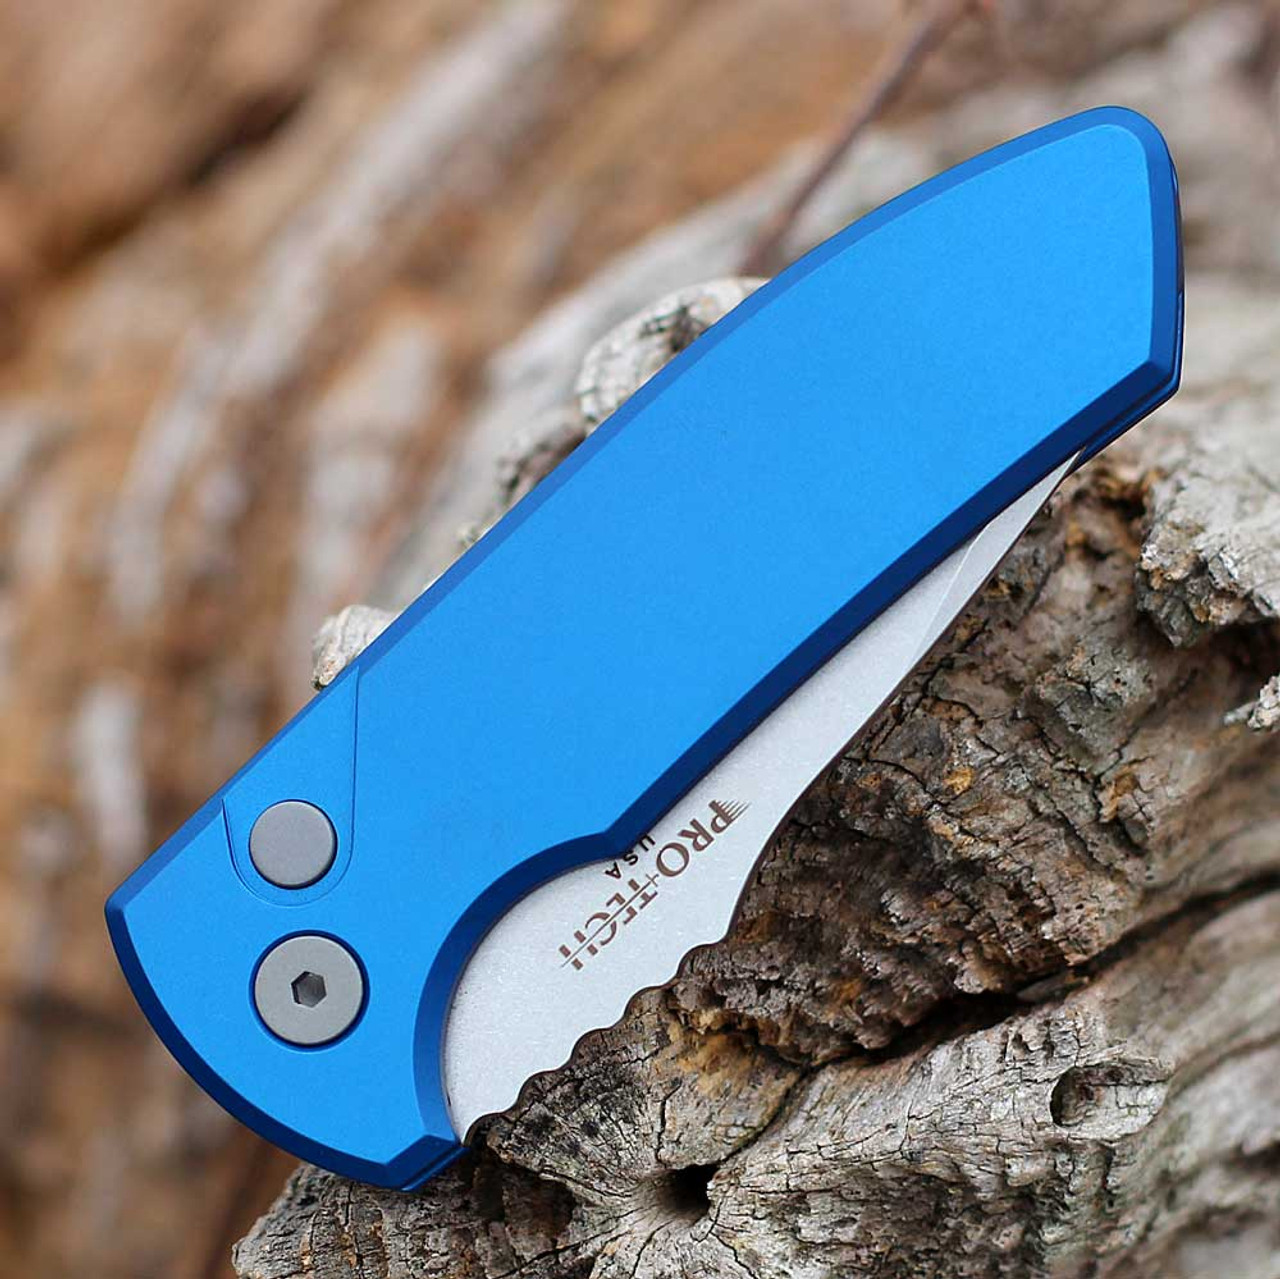 Pro-Tech Les George Short Bladed Rockeye (SBR) Automatic (LG401) -2.5" CPM-S35VN Stonewashed & Satin Clip Point Blade, Blue Aluminum Handles - Les George Design